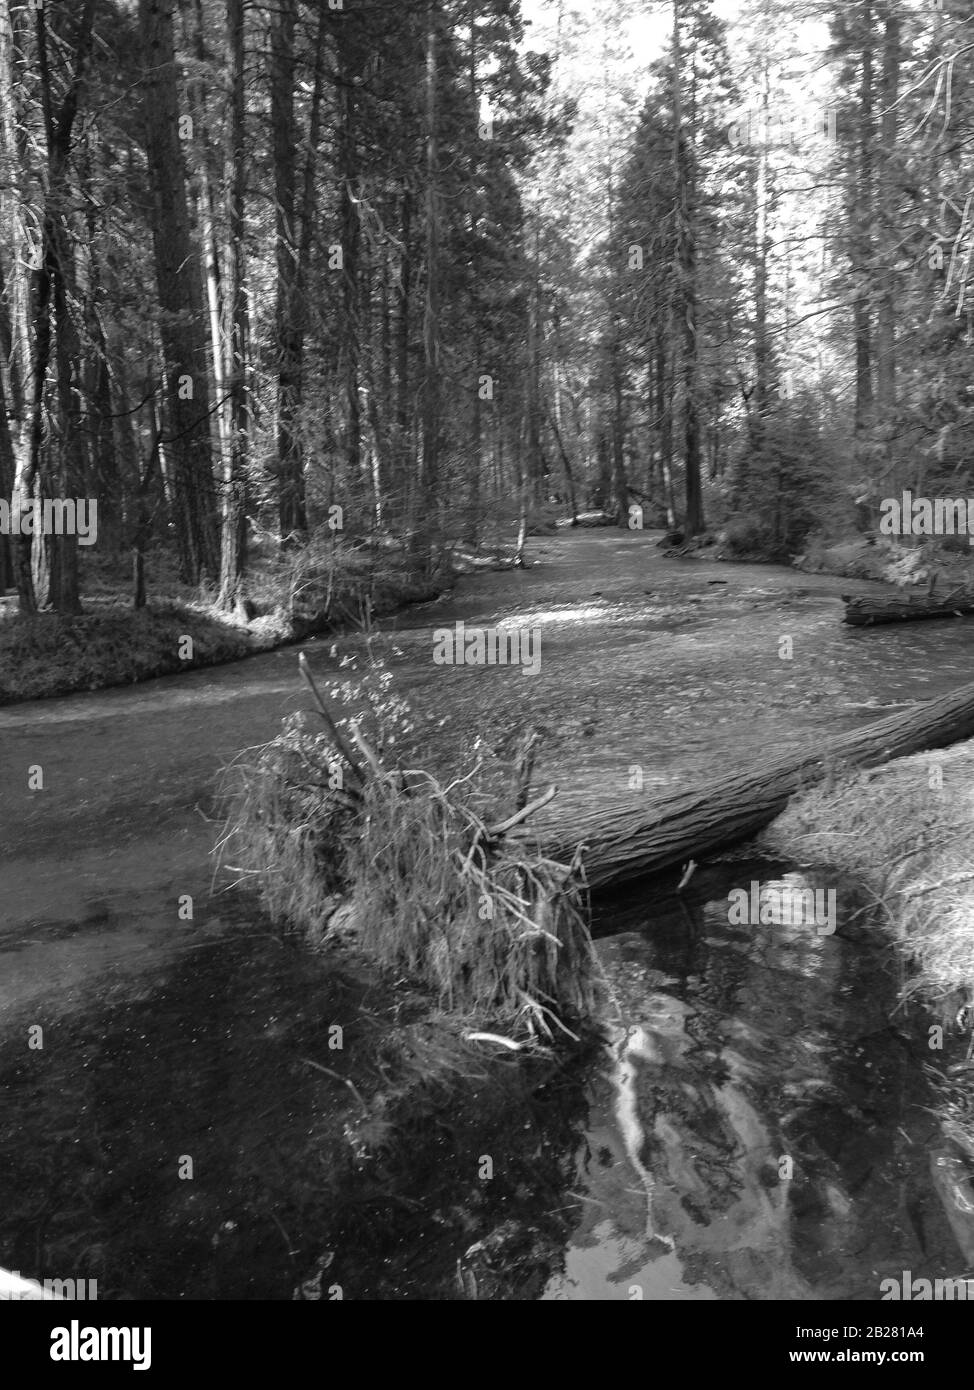 View of the Yosemite creek in the Yosemite Valley, Sierra Nevada in Northern California, United States, Black and White Picture Stock Photo